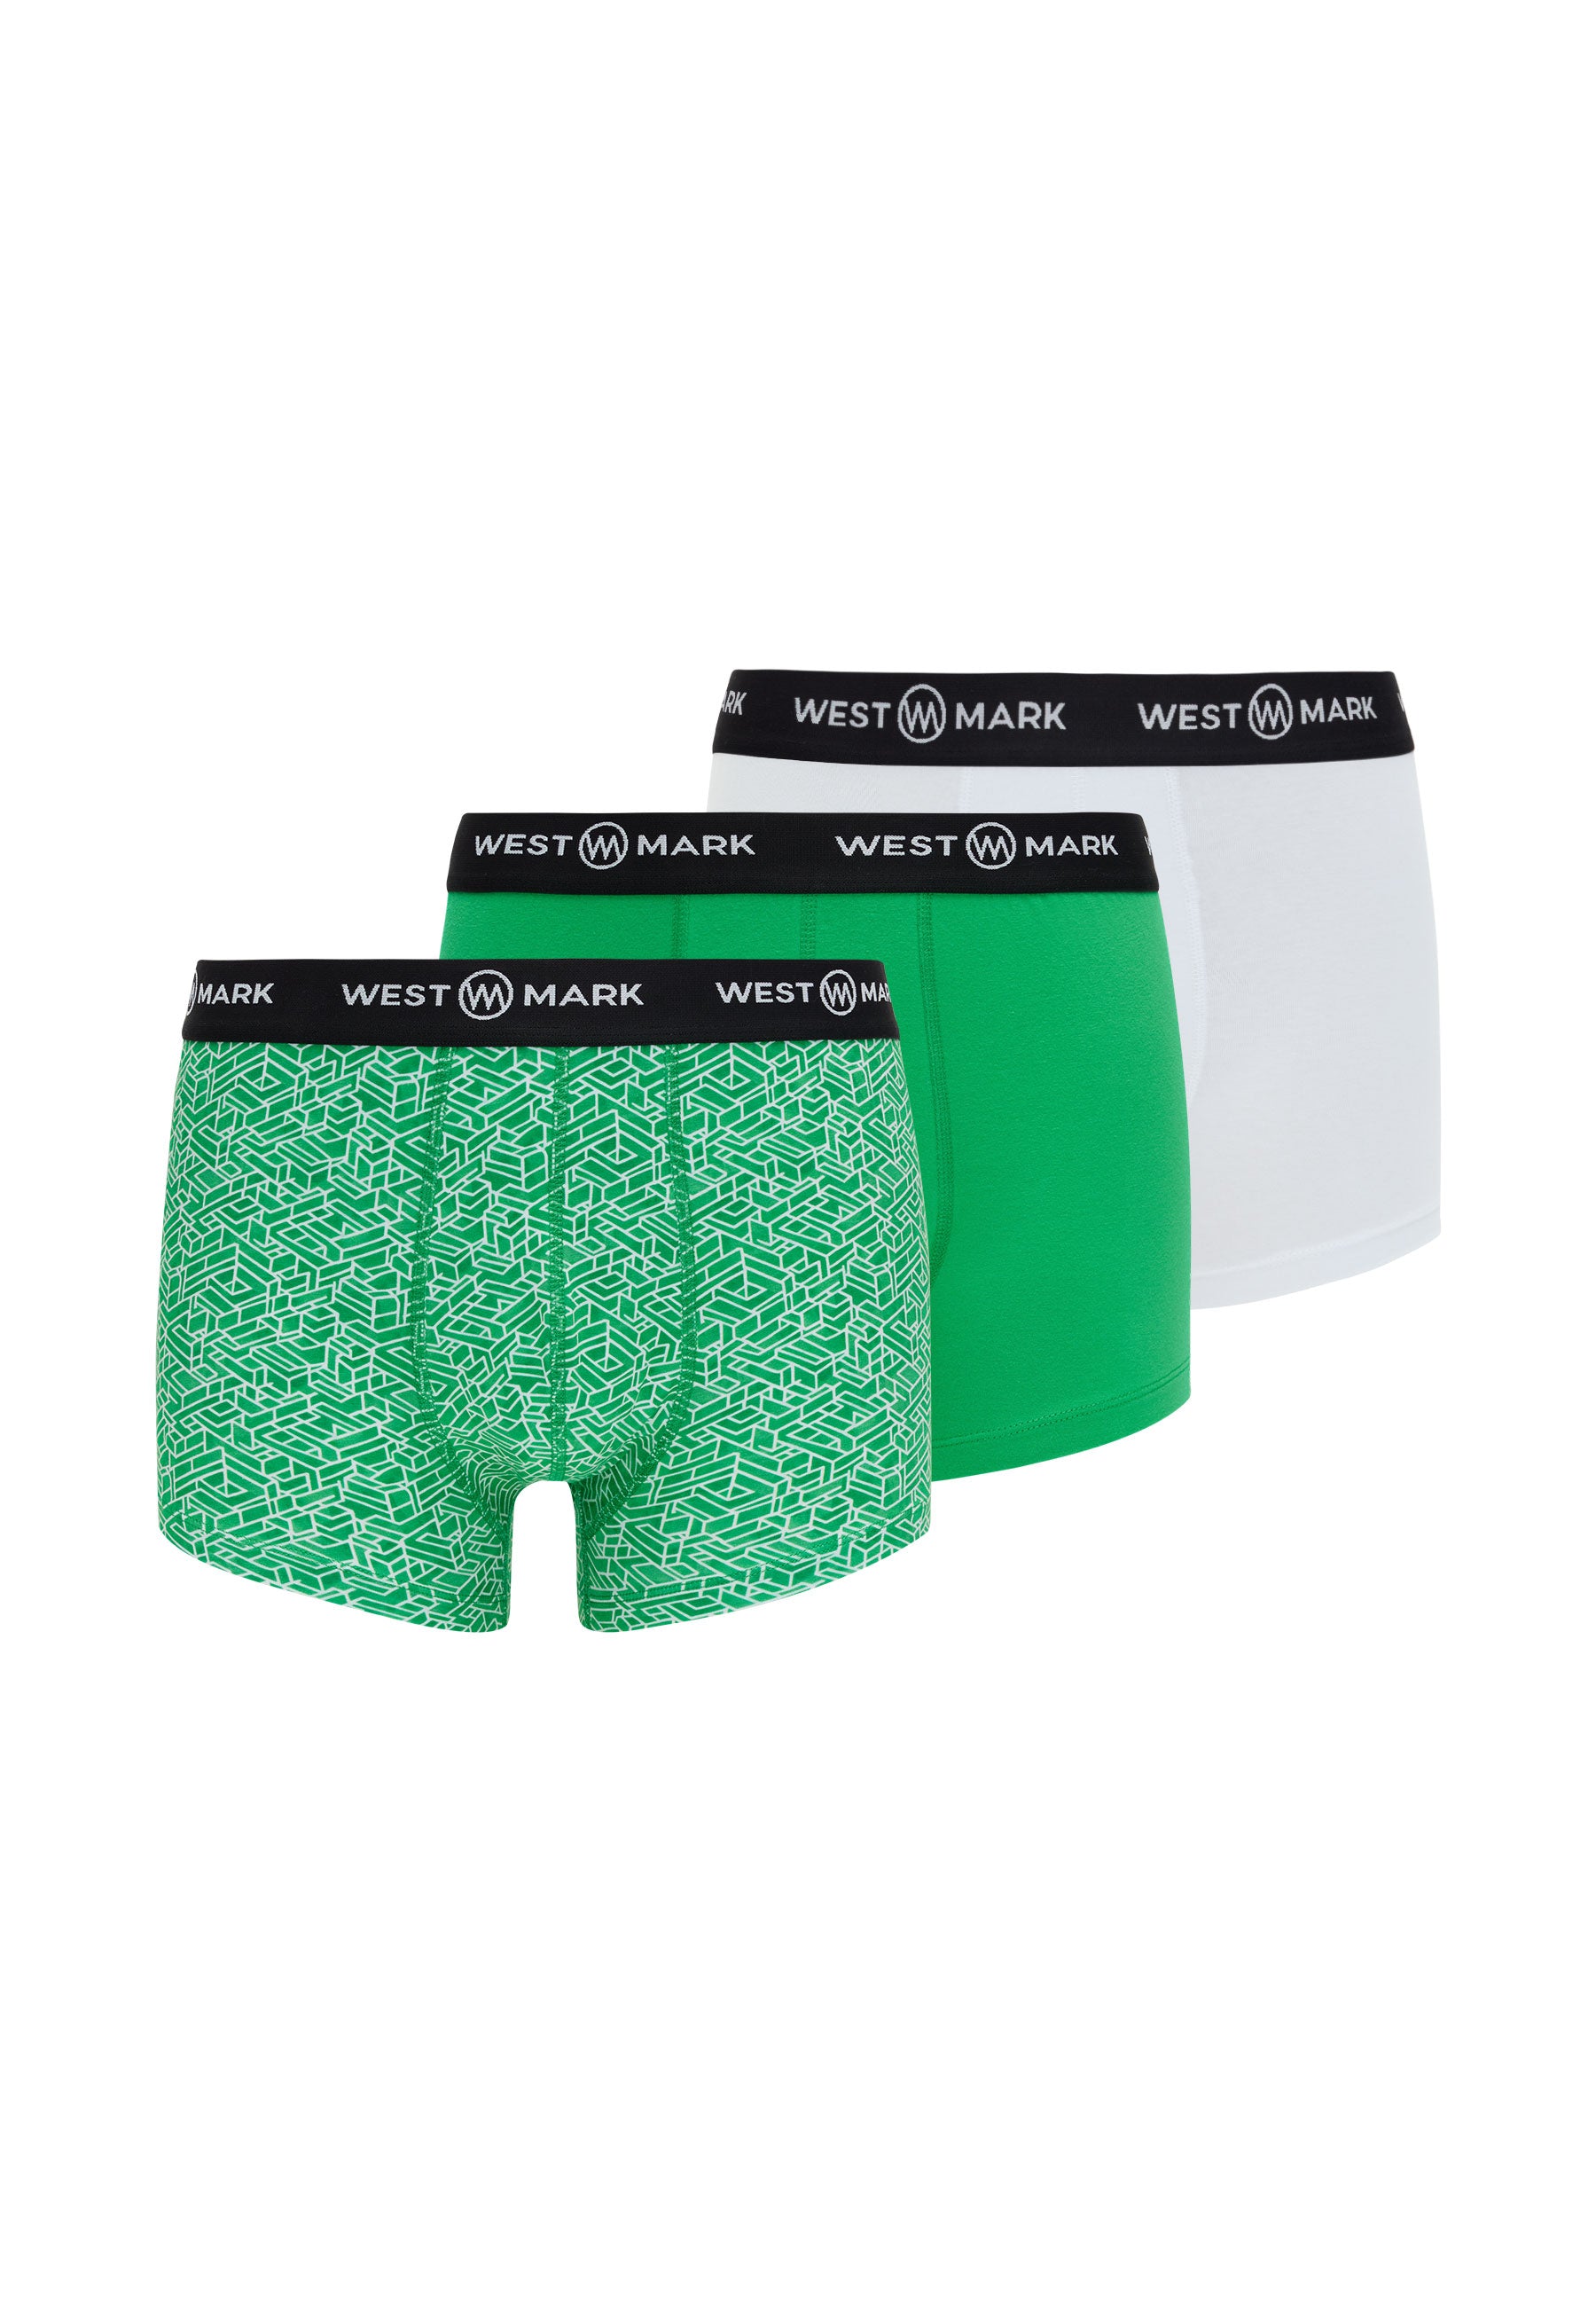 OSCAR 3-PACK WMABSTRACT in Green, White